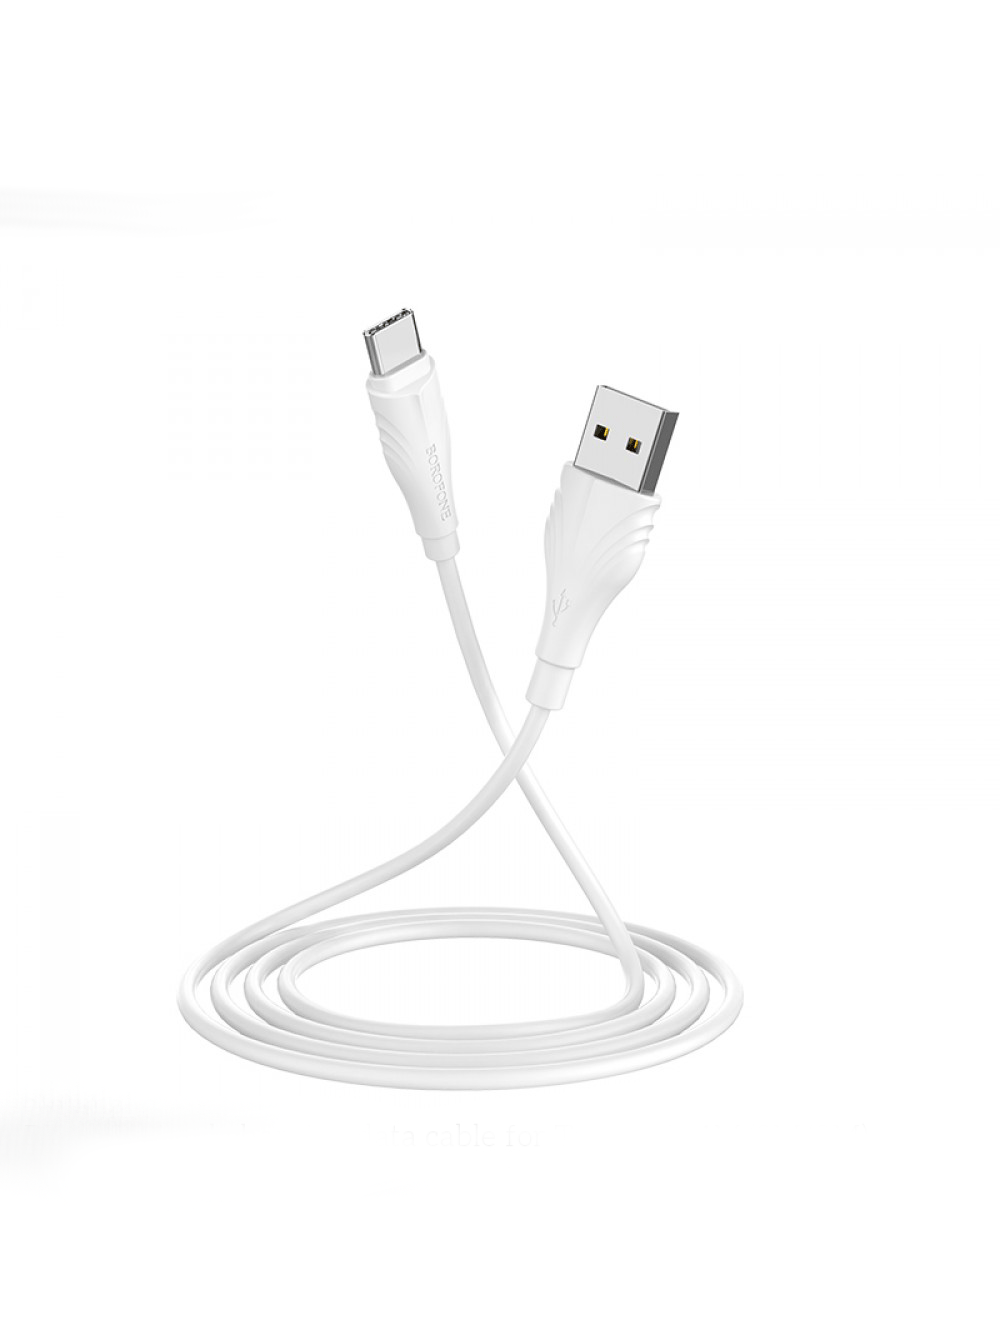 Wqwasd Hoco Borofone Usb Cable Bx18 Optimal Charging Data Cable For Type-C (L = 2M) Color: White